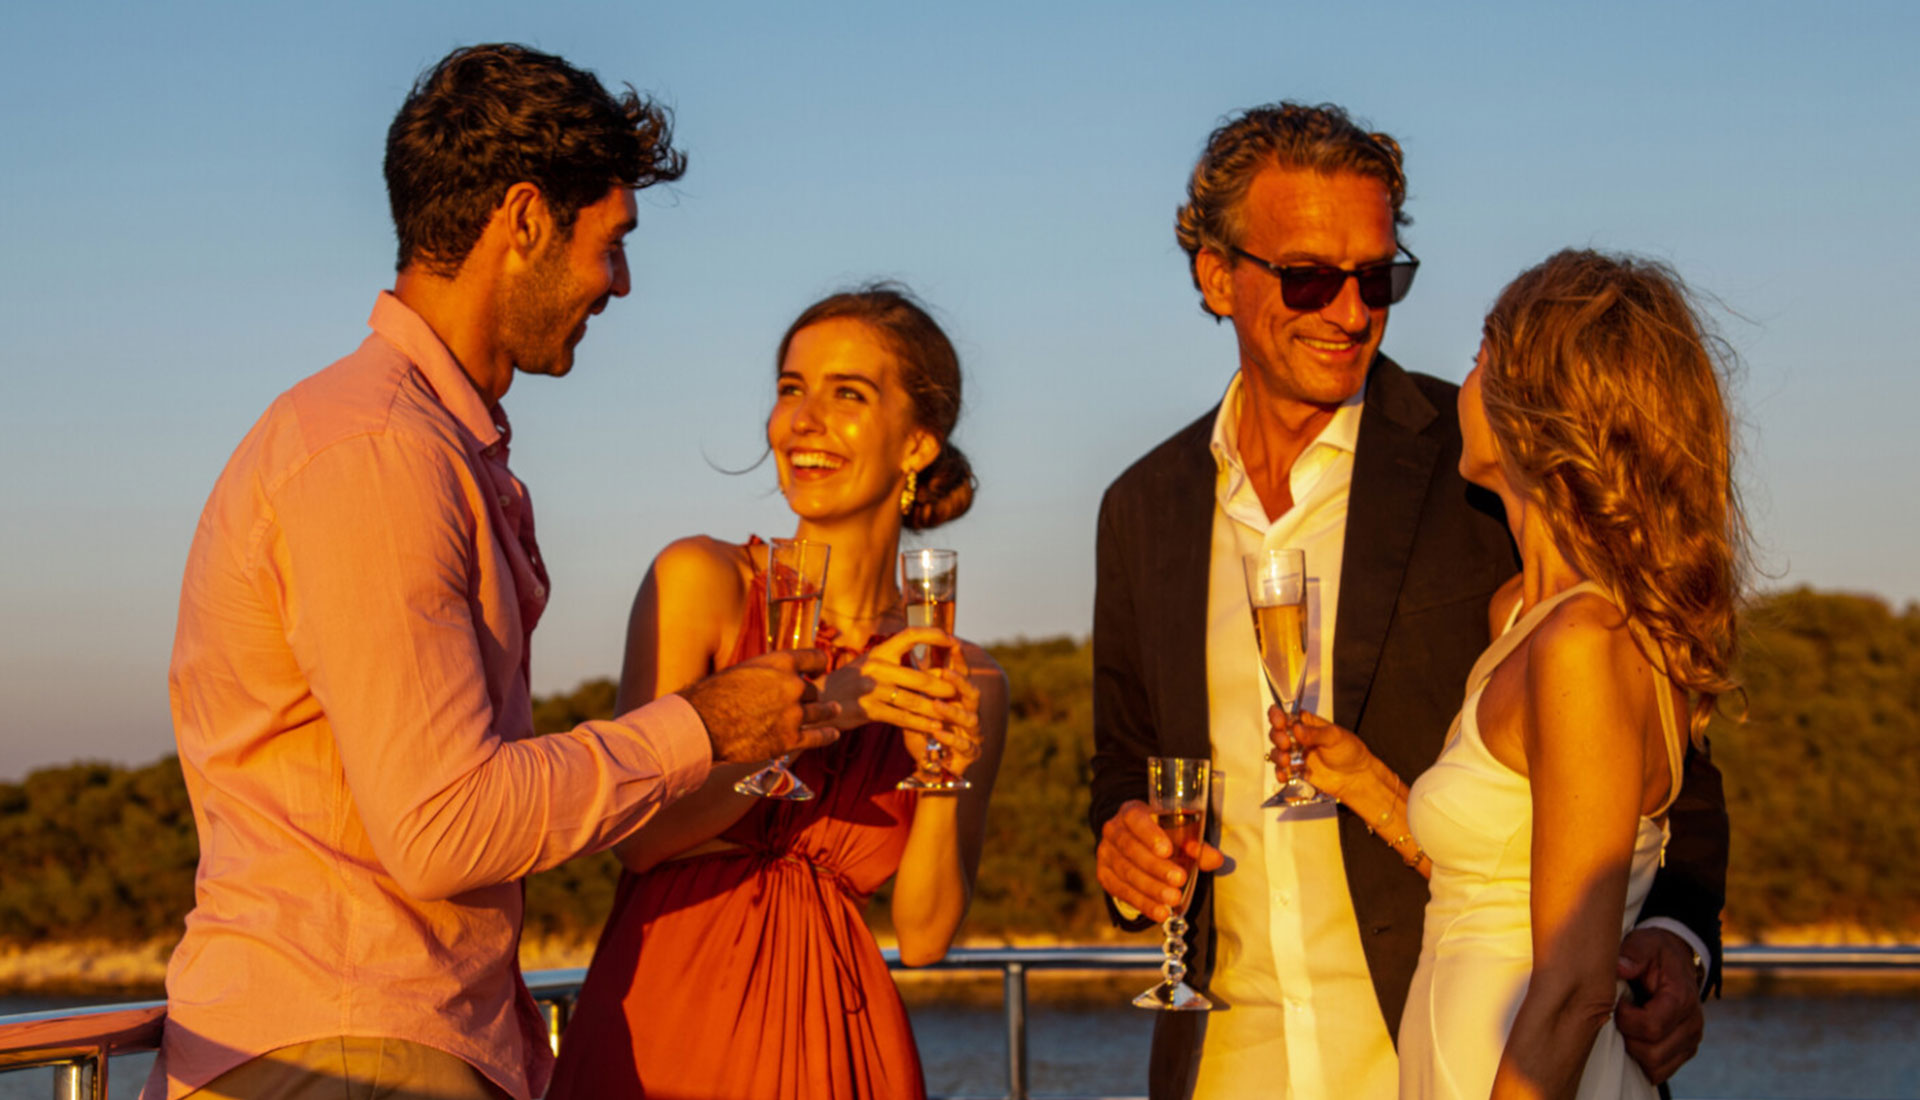 Celebrate the Presidential weekend aboard a yacht charter